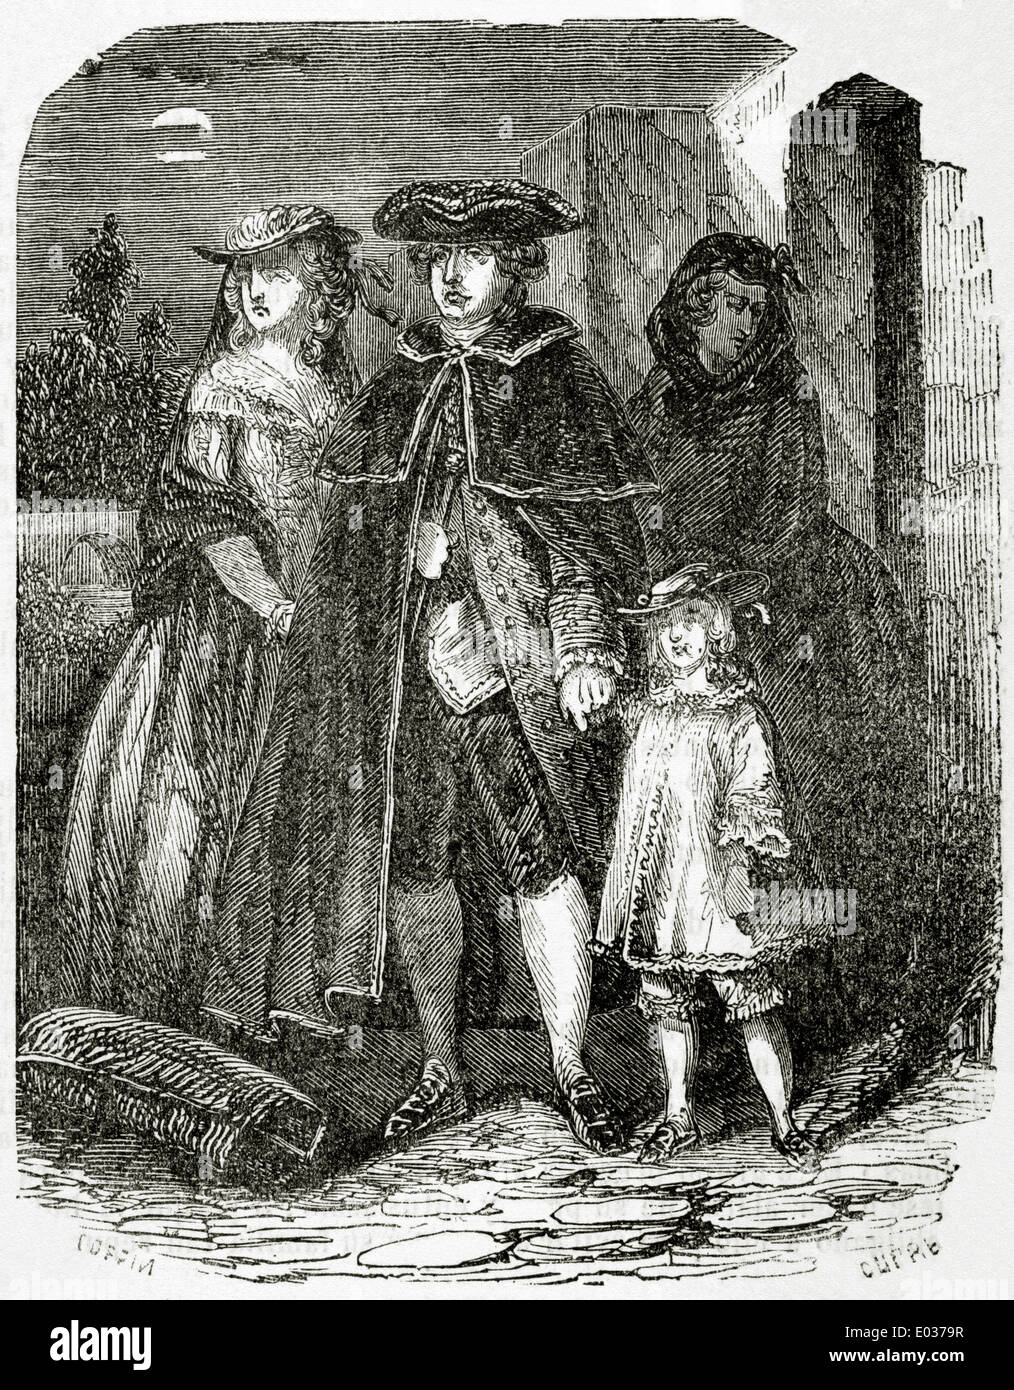 French Revolution (1789-1799). Escape of Louis XVI (1754-1793) and his family, 1791. Engraving by Dupre. Stock Photo